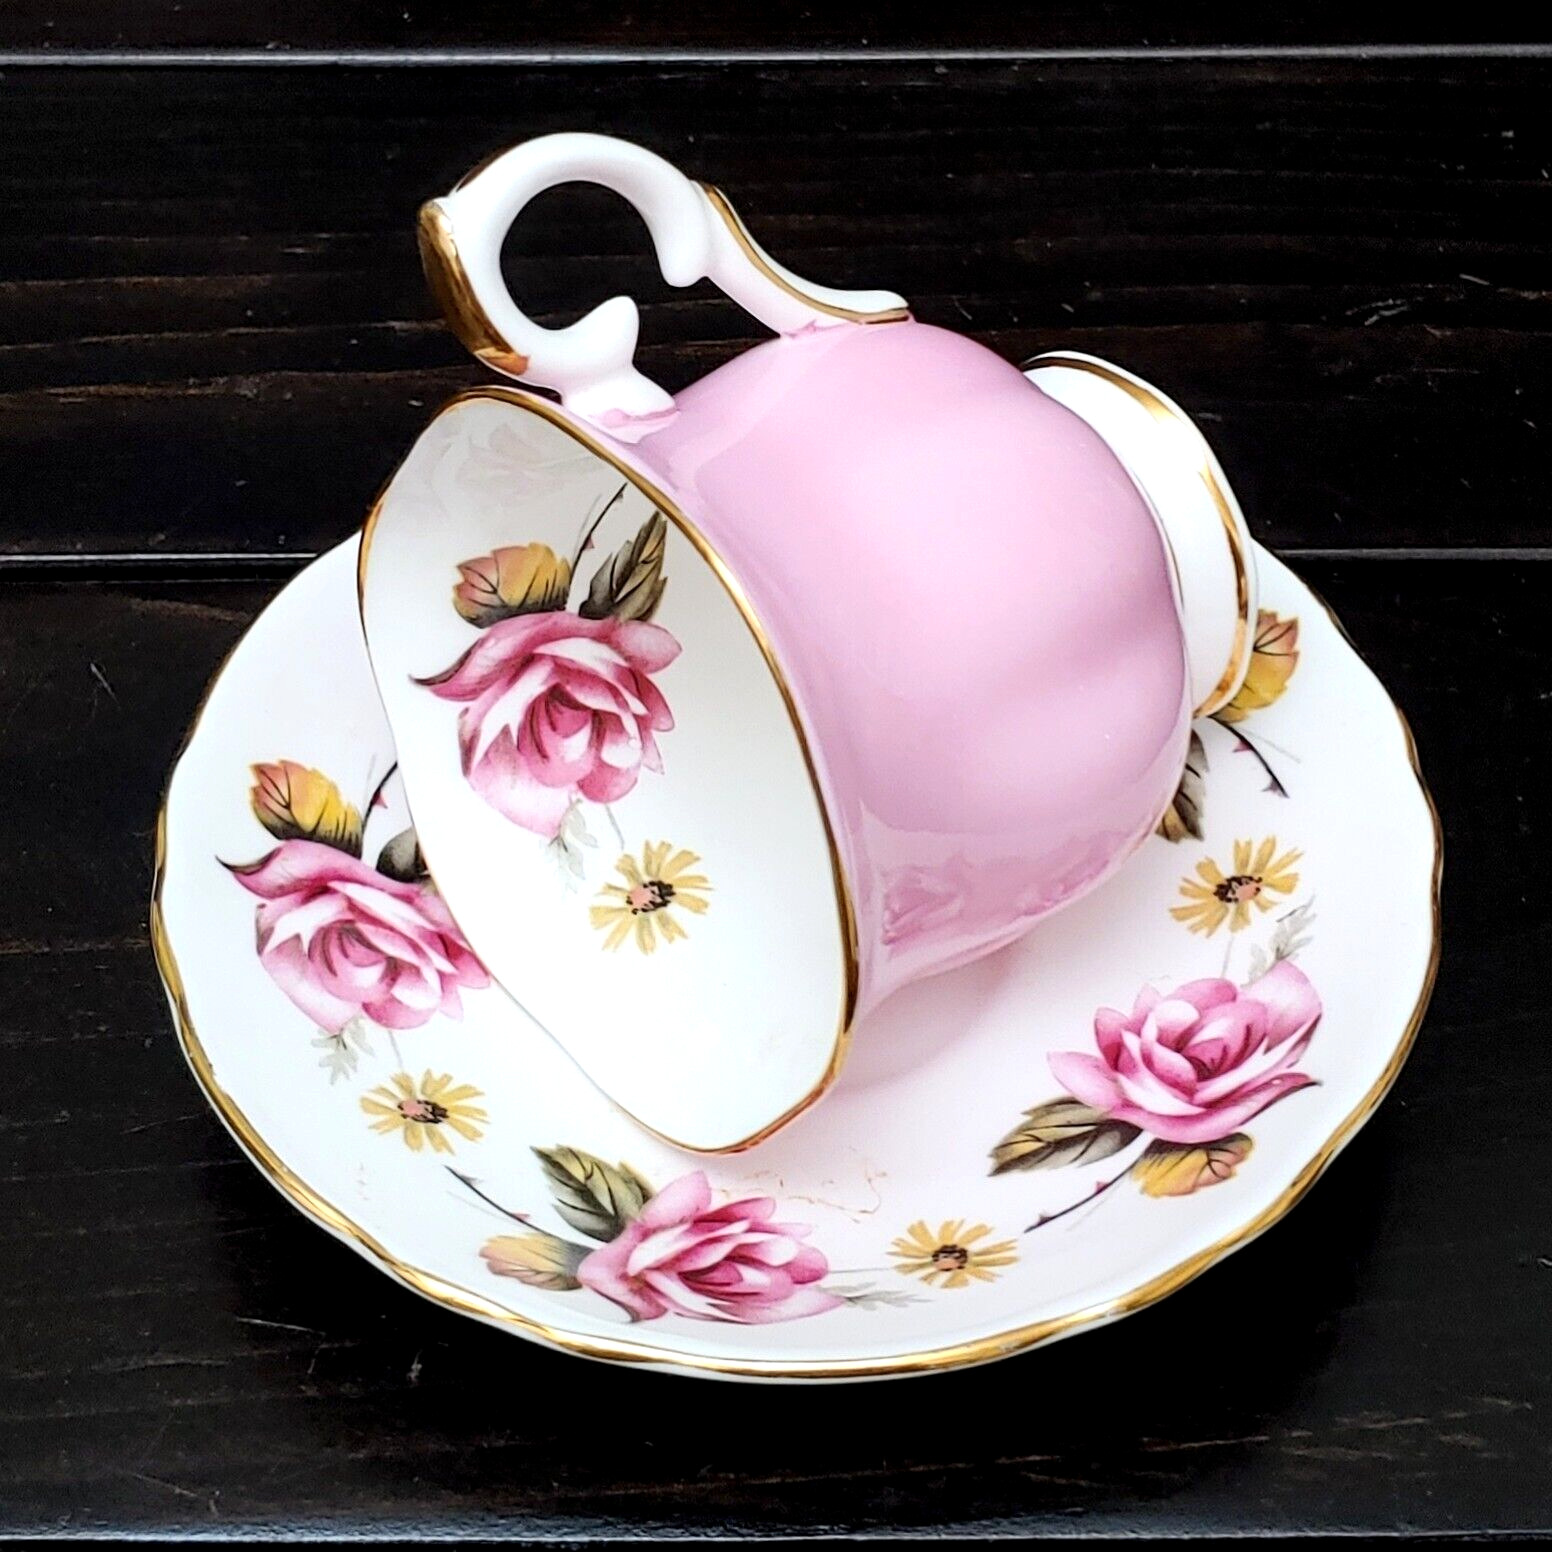 Crown Staffordshire Teacup and Saucer Pink with Roses Gold Rim Tea Cup